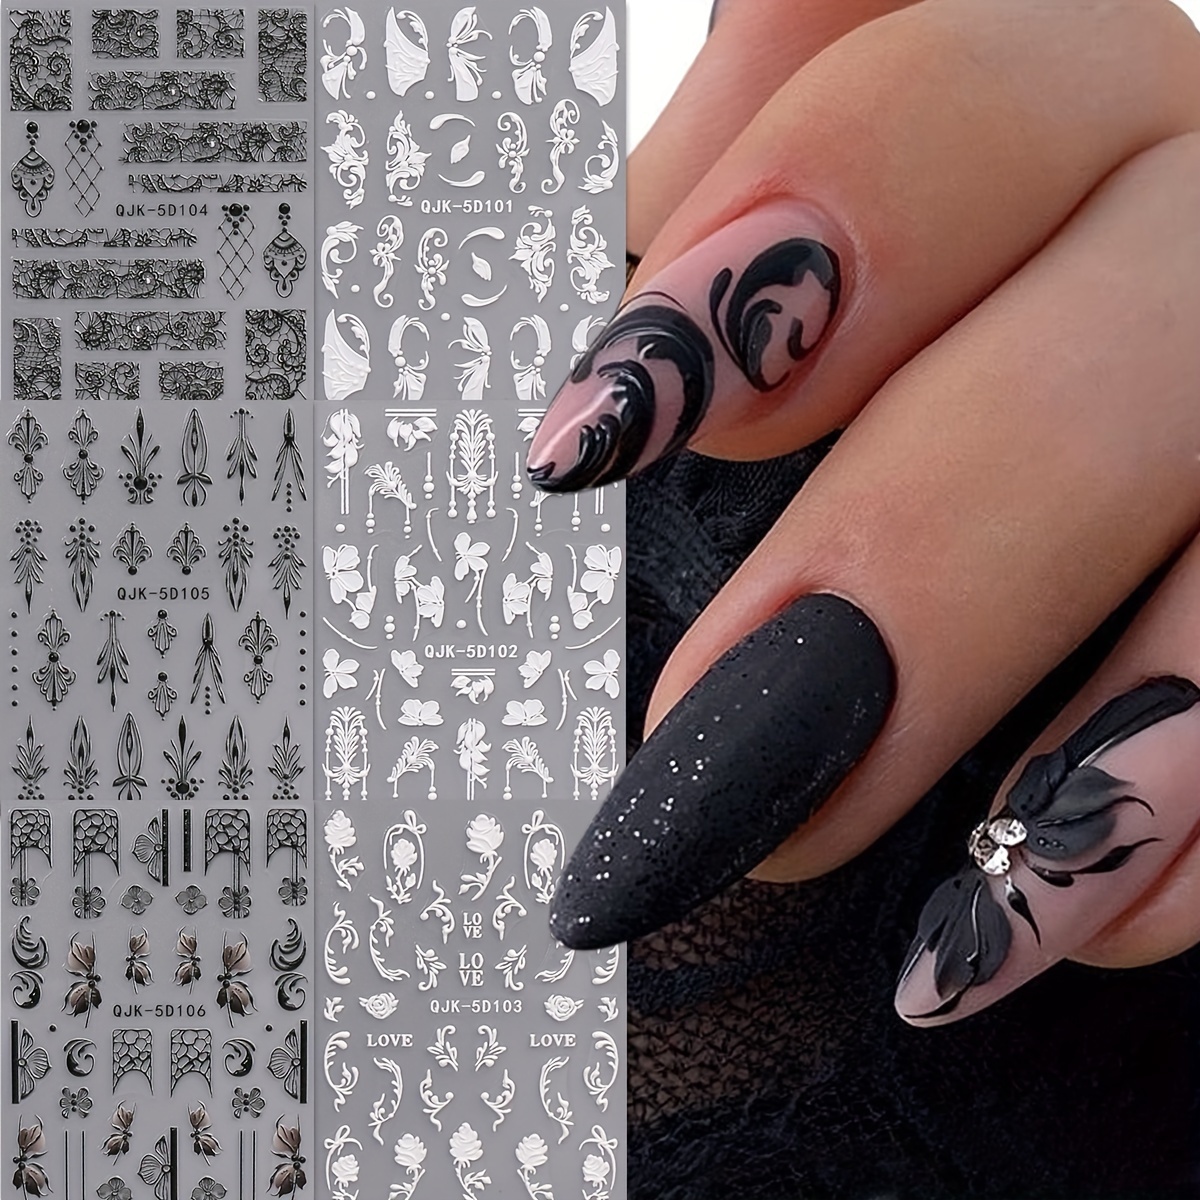 

6 Sheets 5d Embossed Nail Art Stickers, Black And White Flower Design Nail Art Decals For Nail Art Decoration, Self Adhesive Nail Art Supplies For Women And Girls